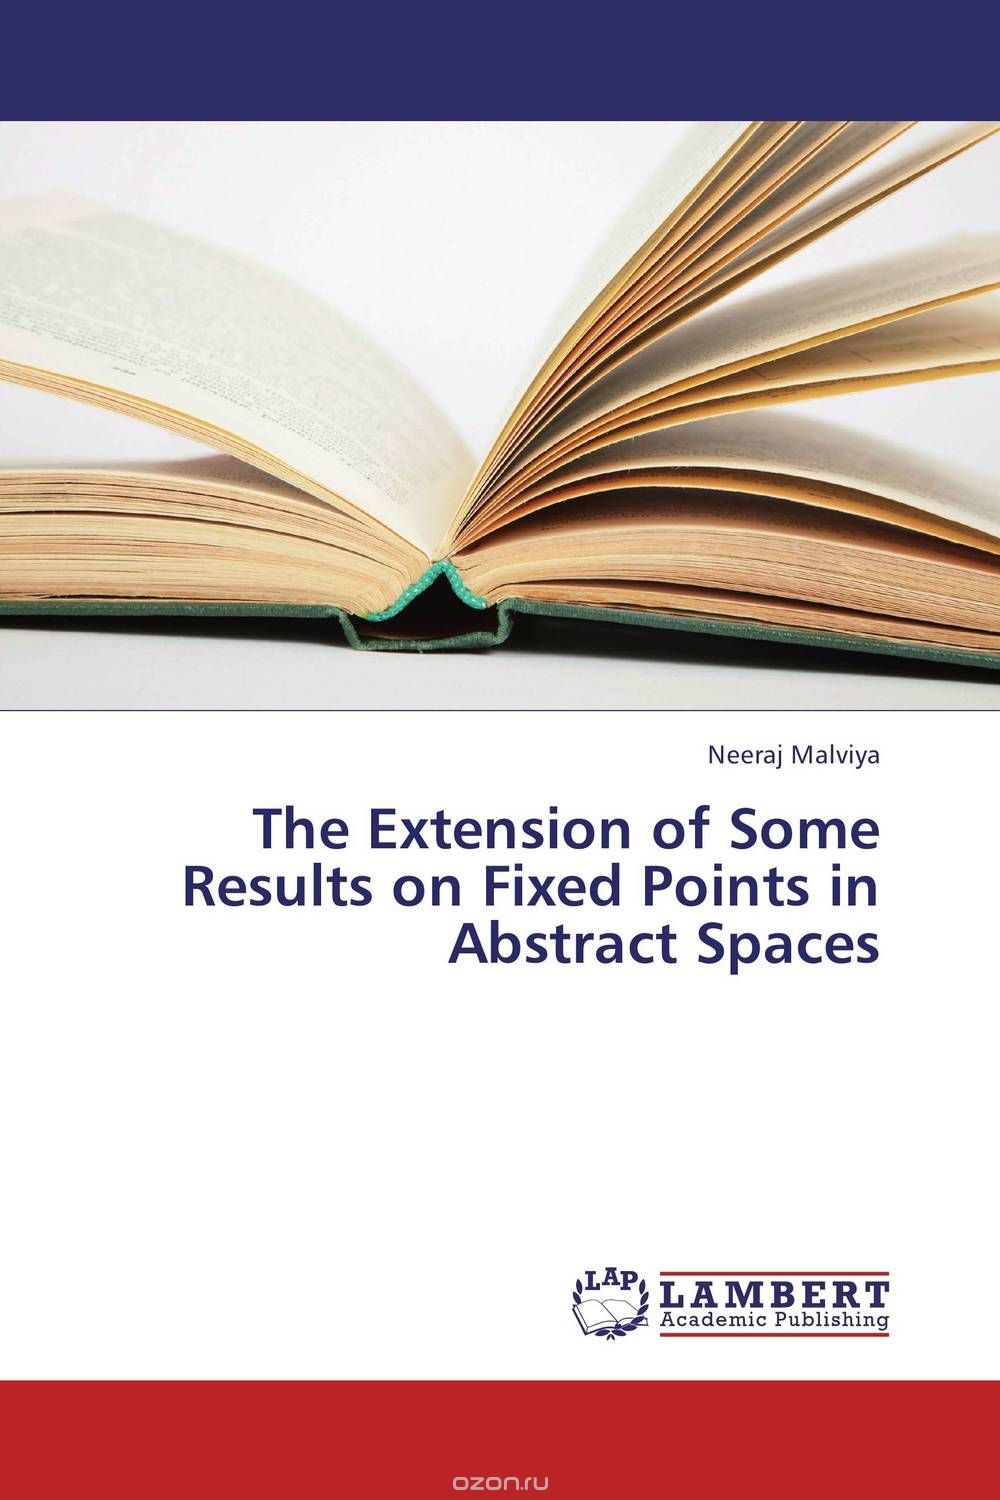 The Extension of Some Results on Fixed Points in Abstract Spaces